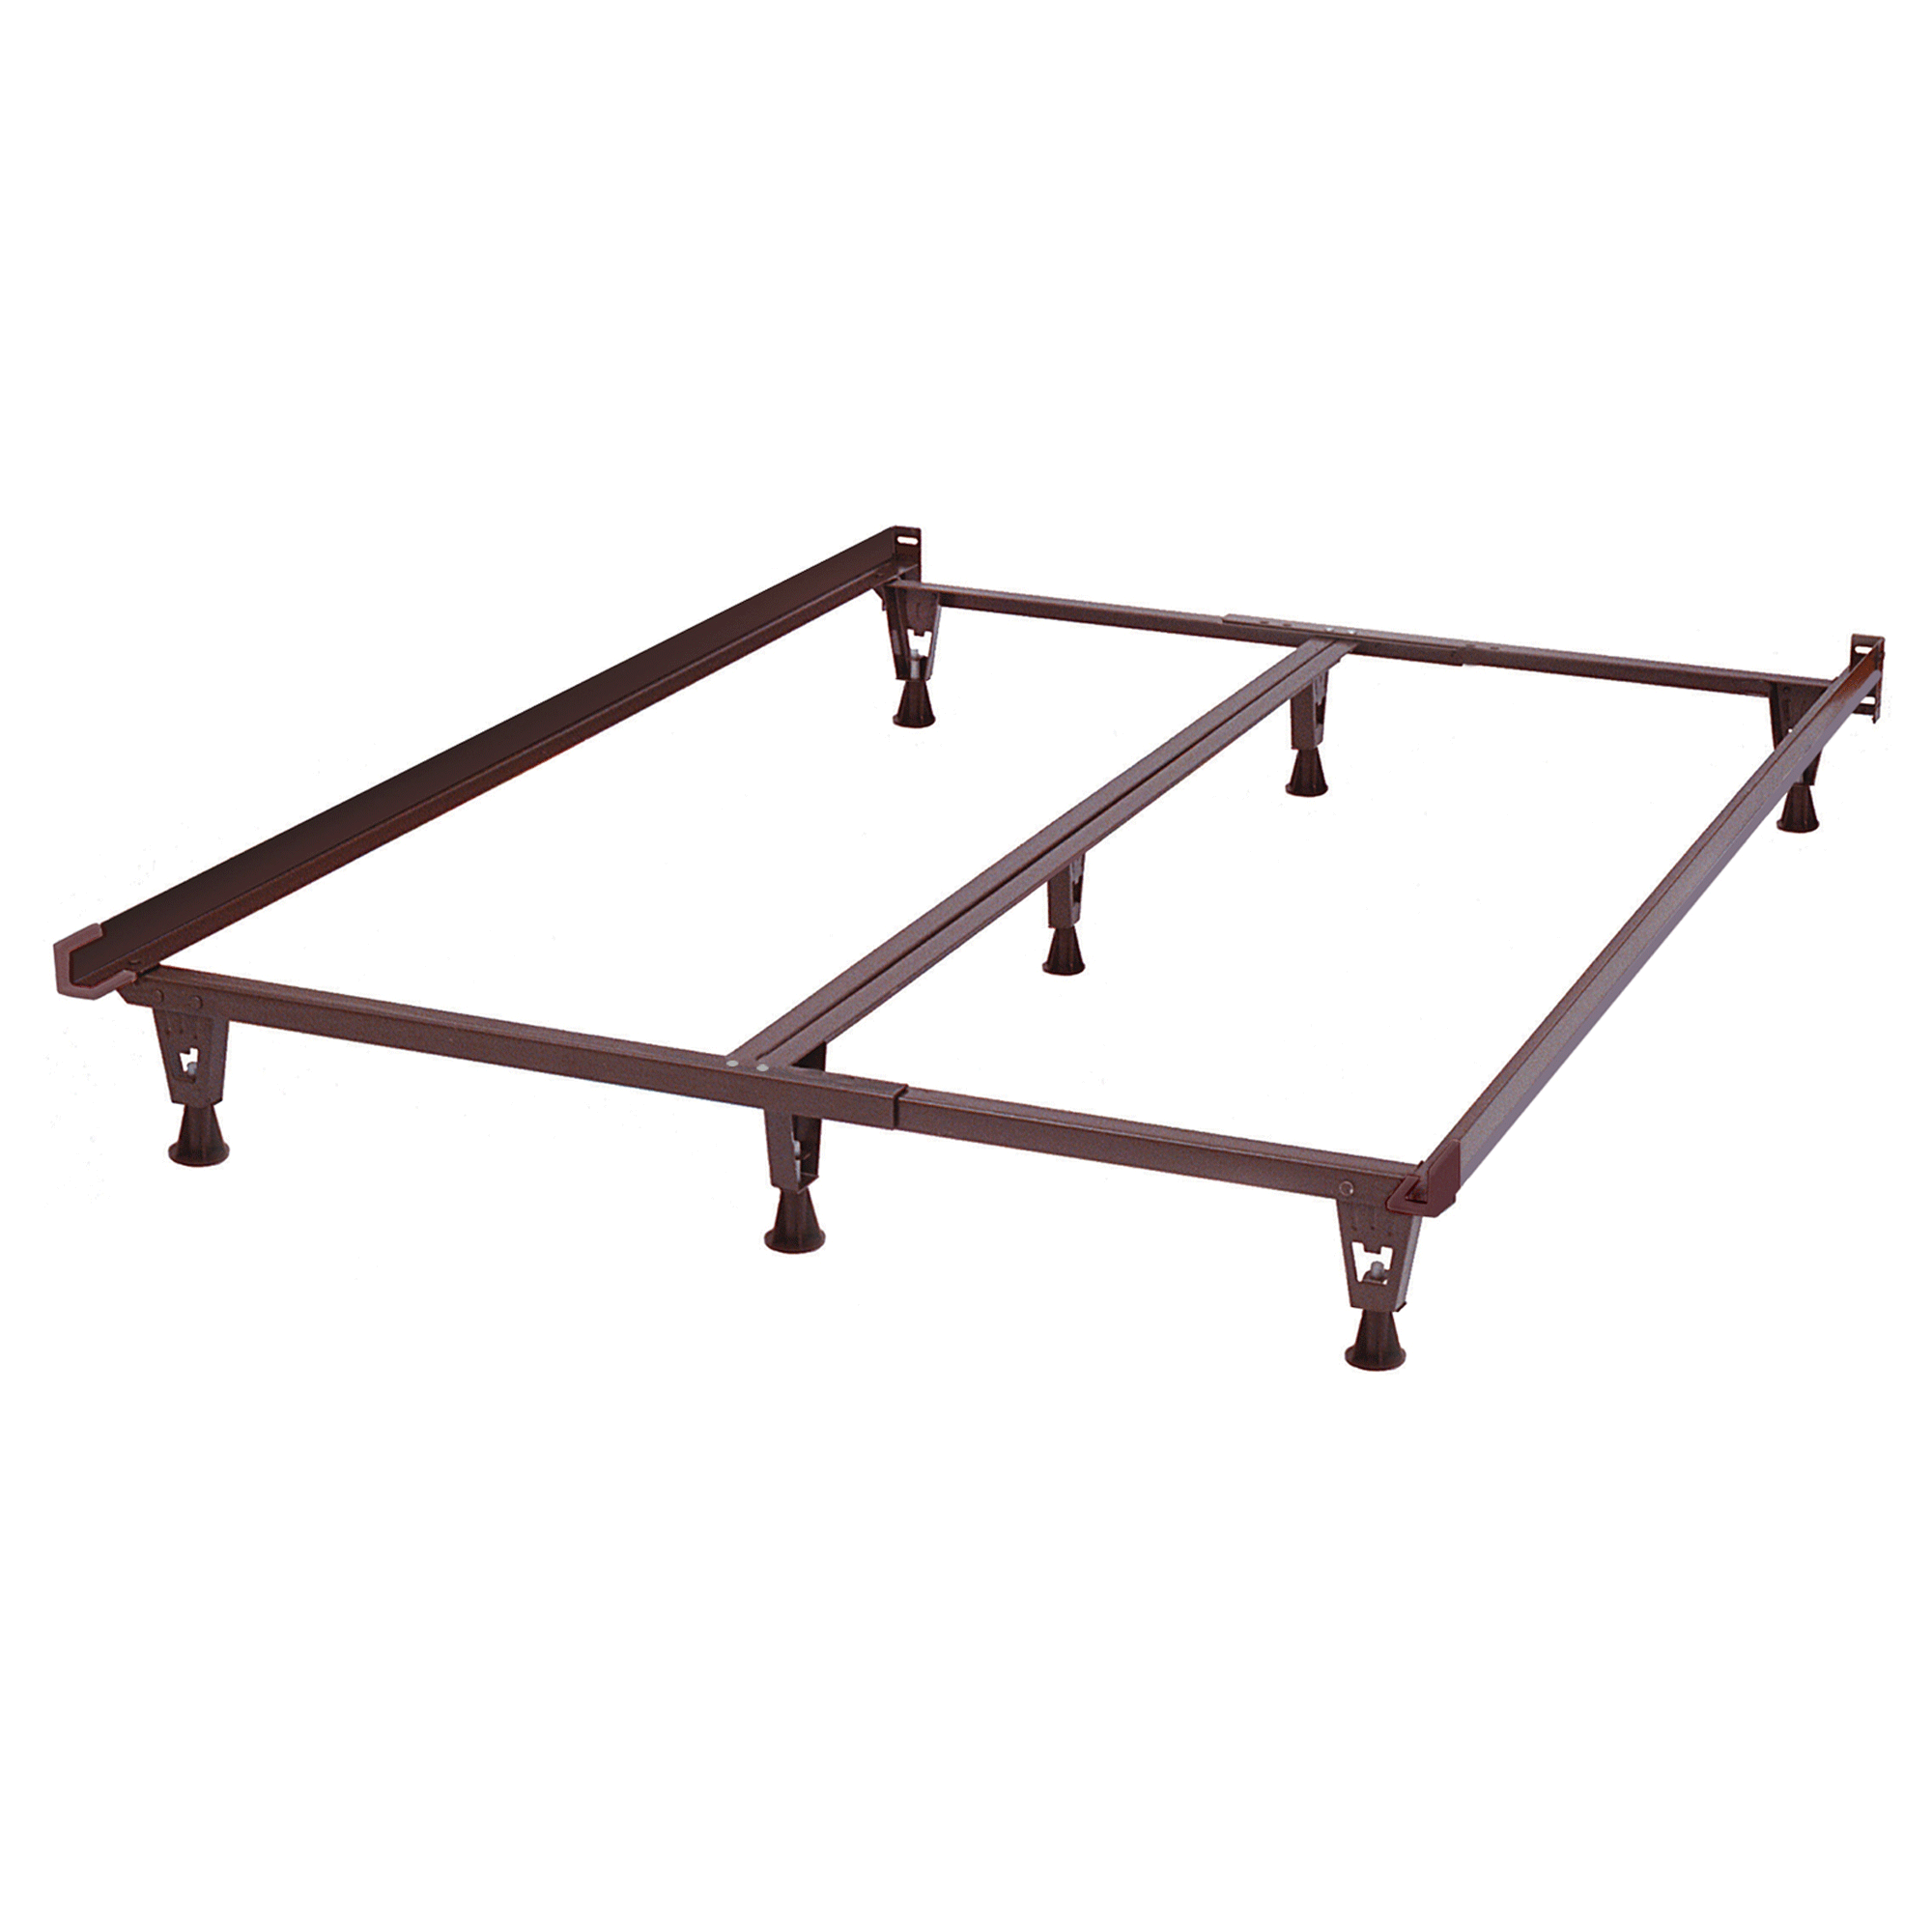 Bed Frames Furniture Bernie Phyl S, How To Put Together A Metal Bed Frame With Wheels